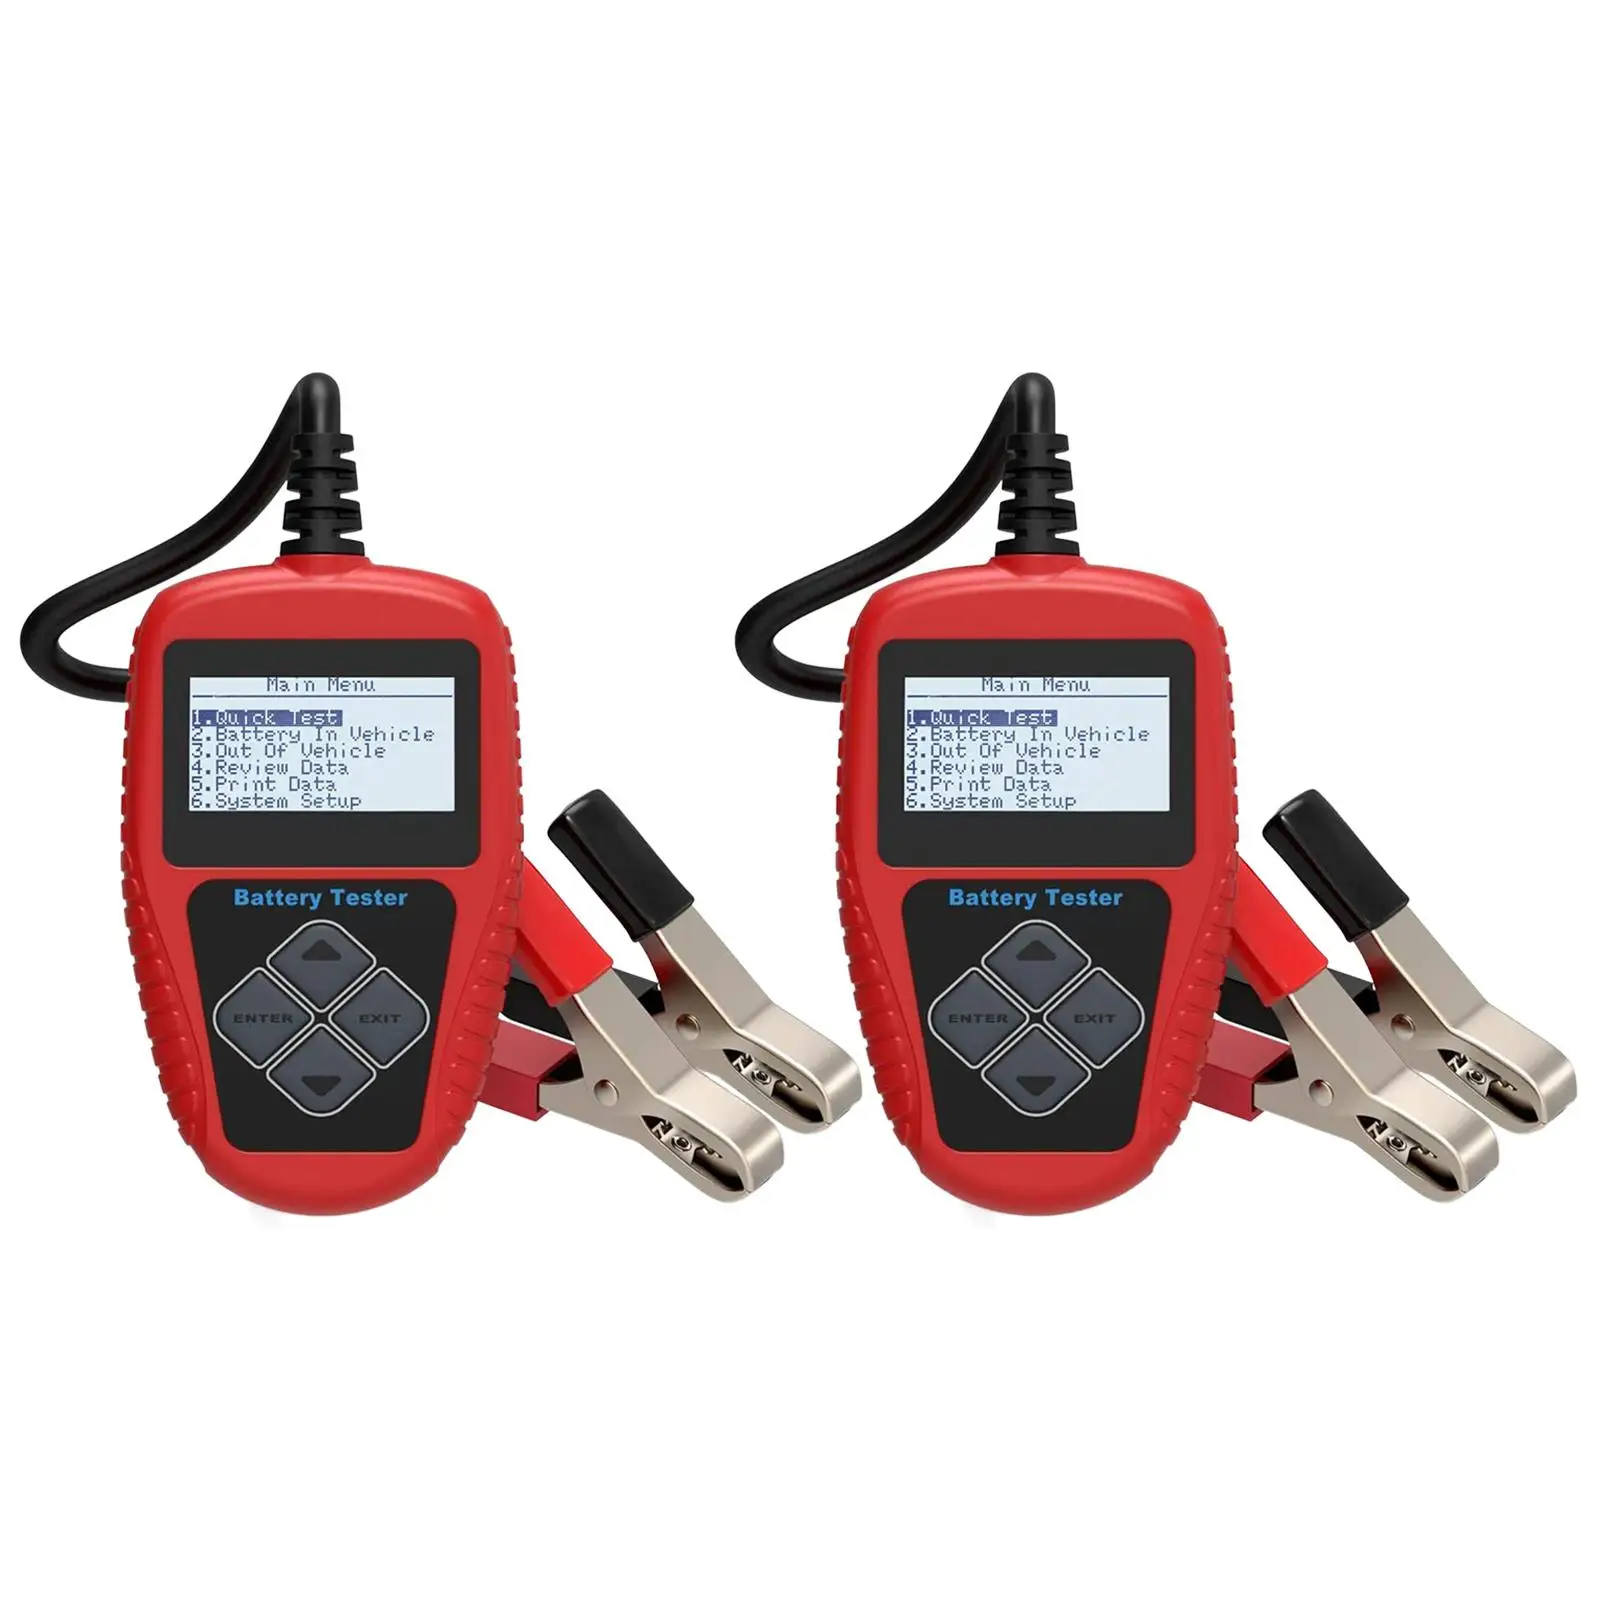 Compact Vehicle BA101 12V Automotive Battery Tester Bad Cell Test Tool